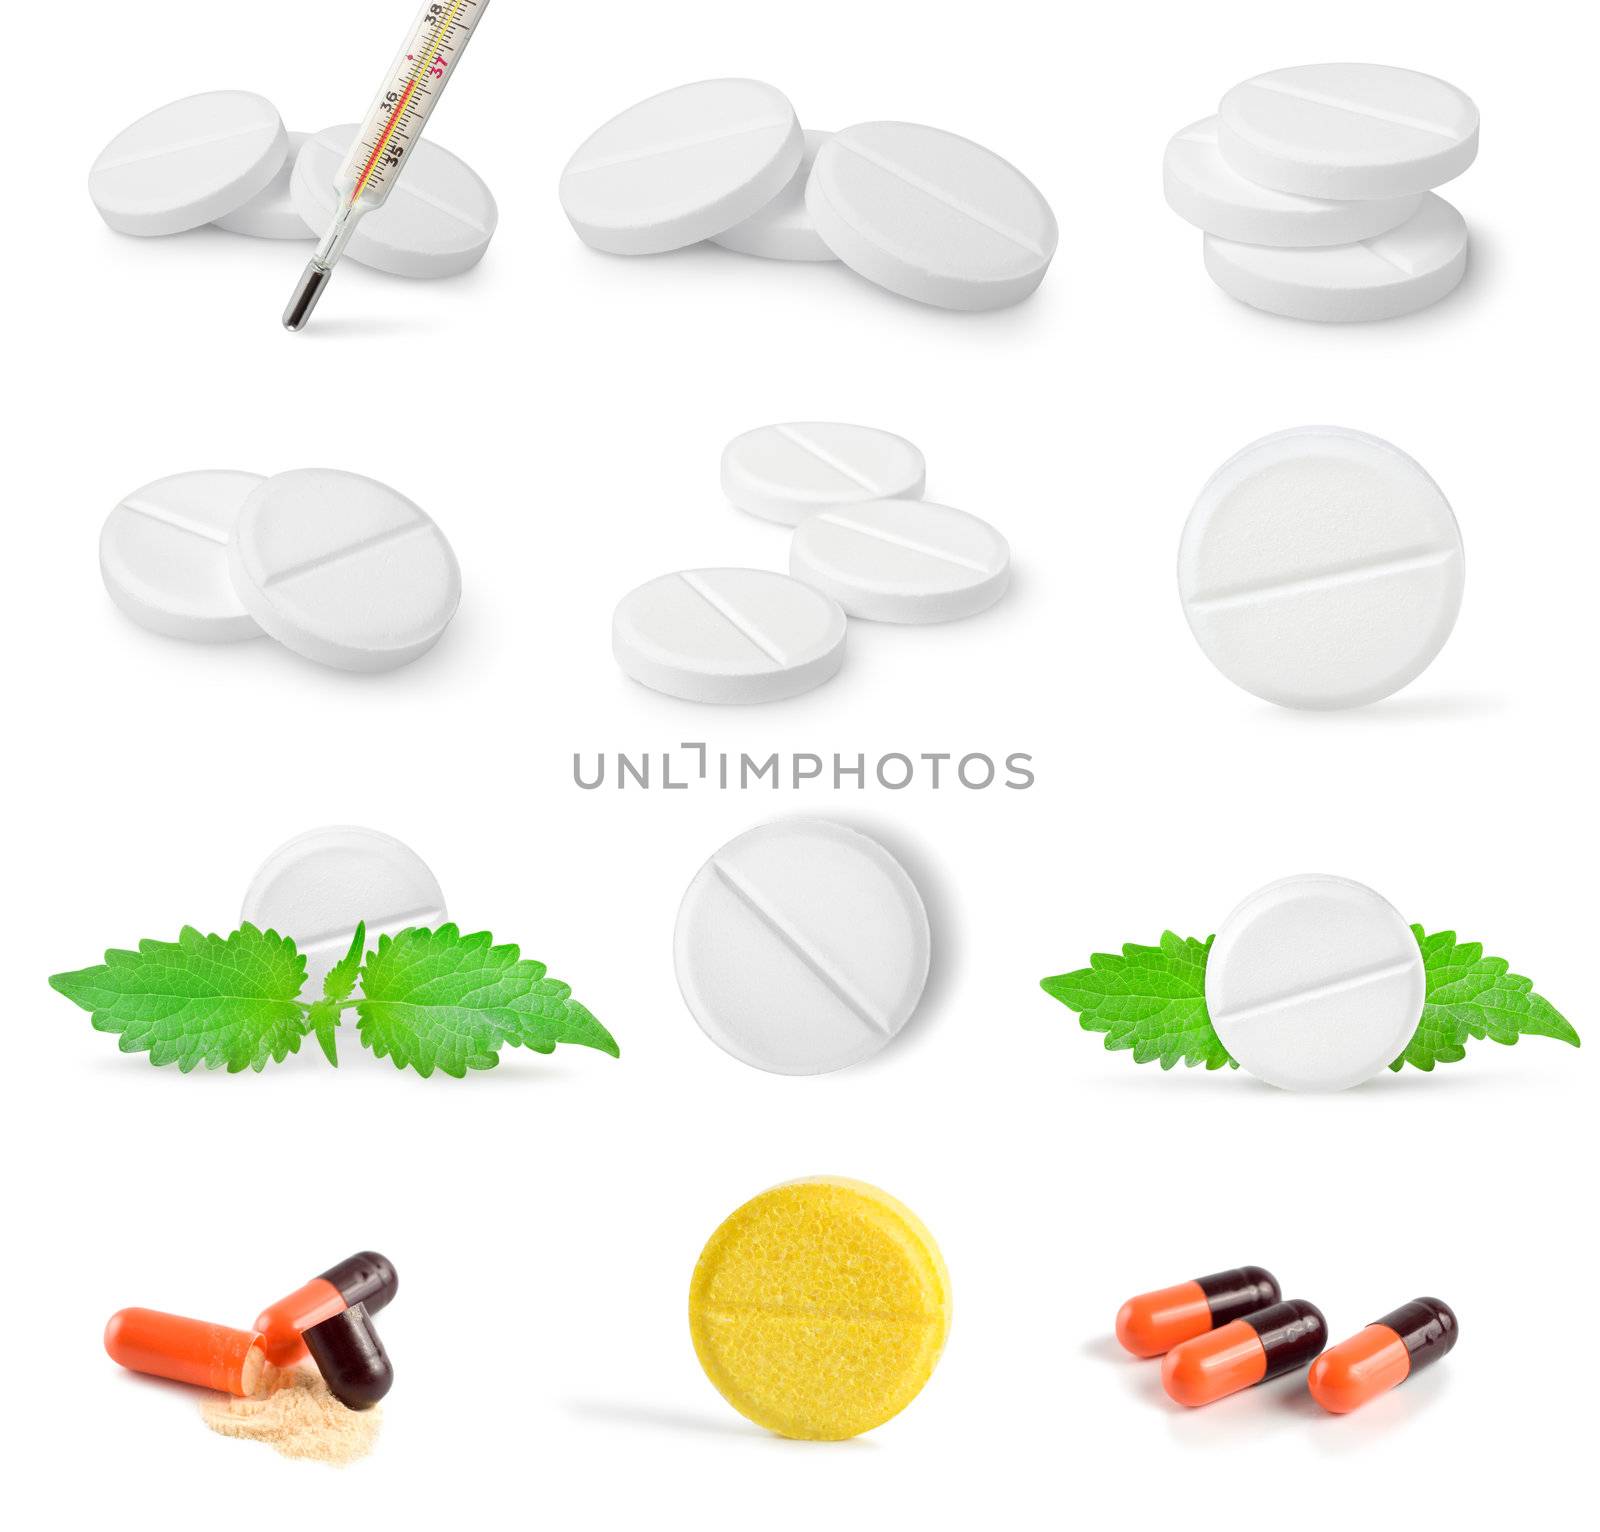 Collage of tablets isolated on a white background